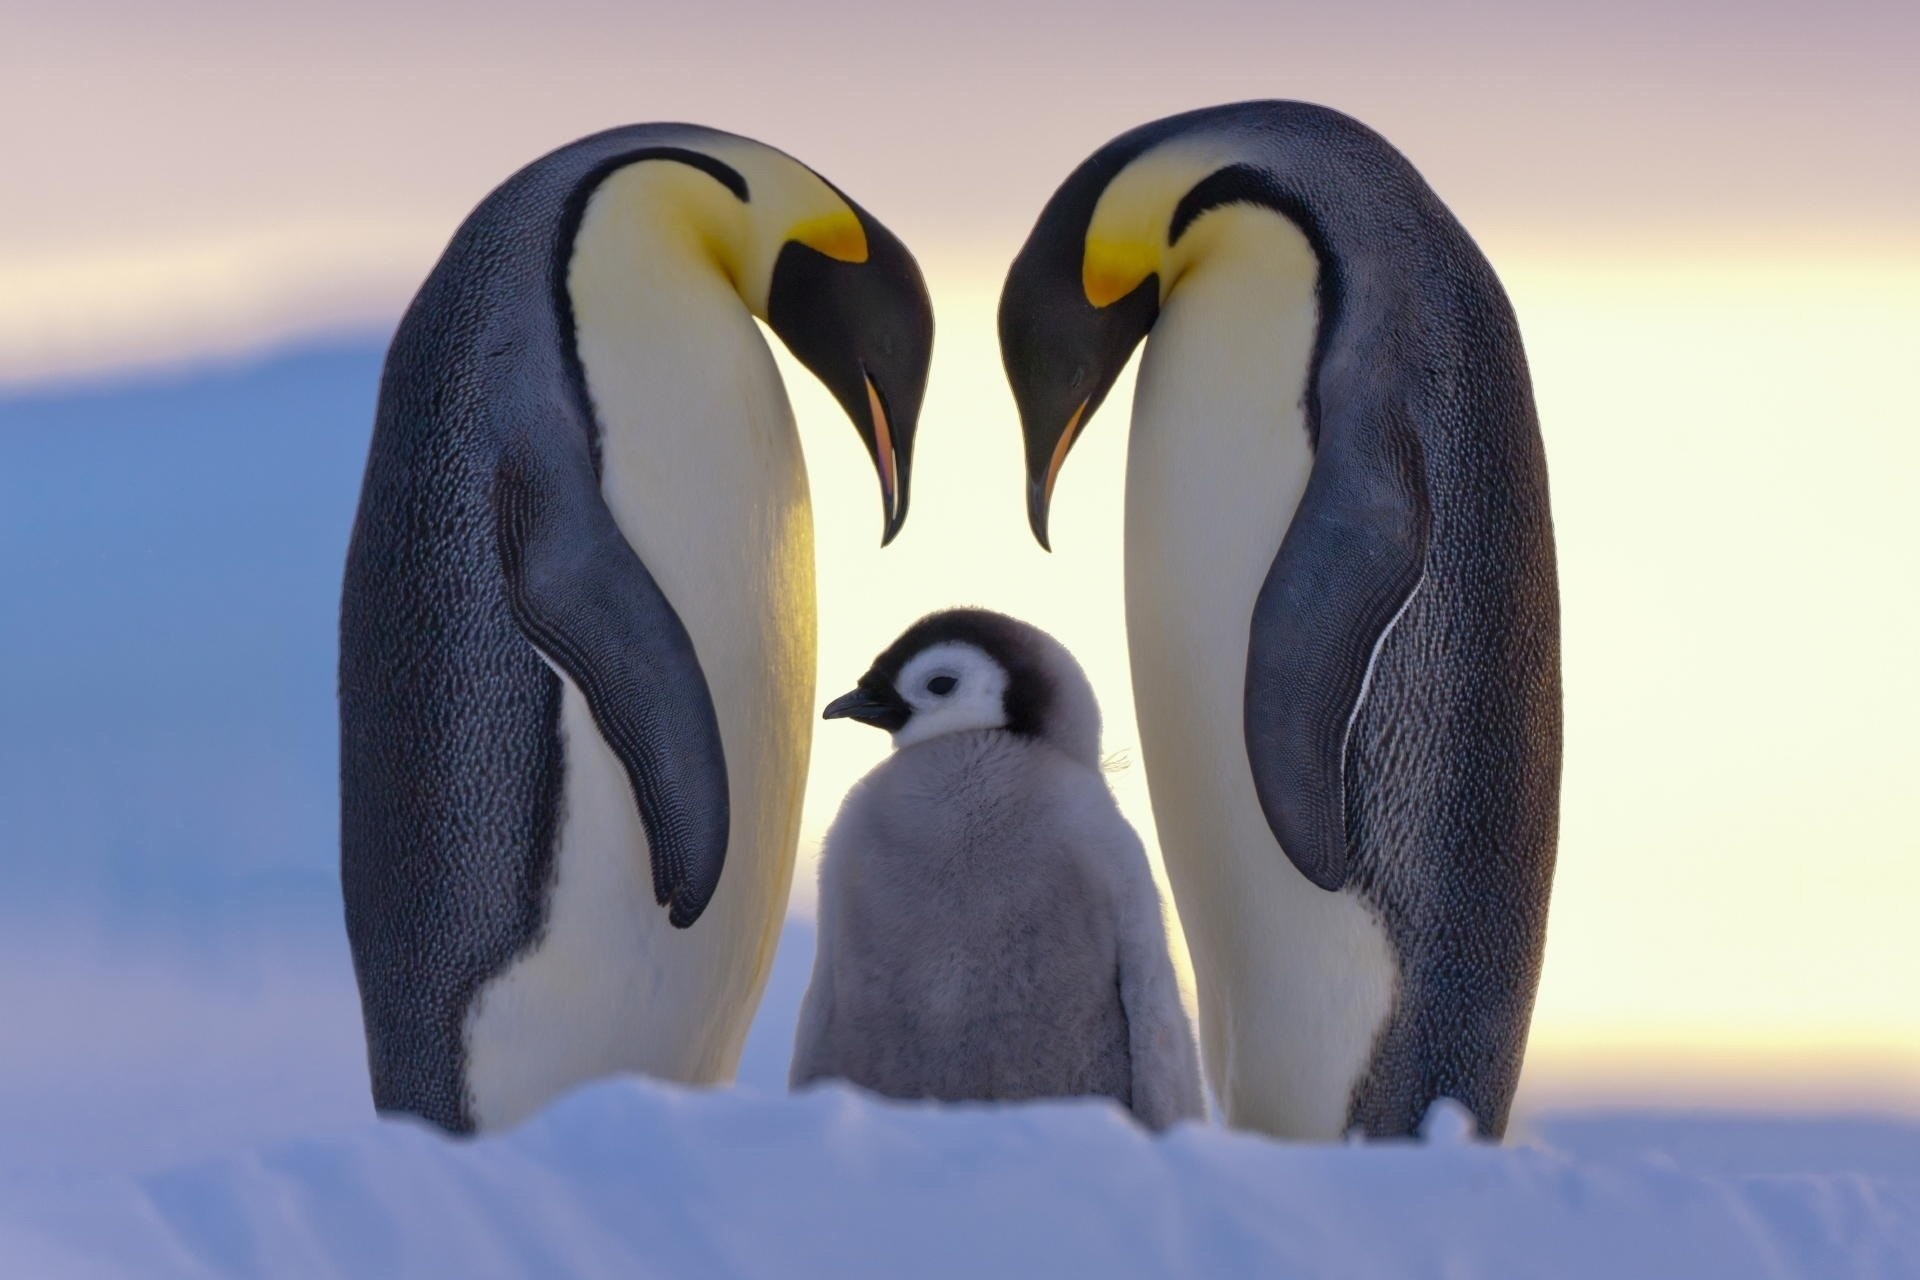 Baby penguin wallpapers, Sweet and adorable, HD and 4K images, Desktop and mobile charm, 1920x1280 HD Desktop